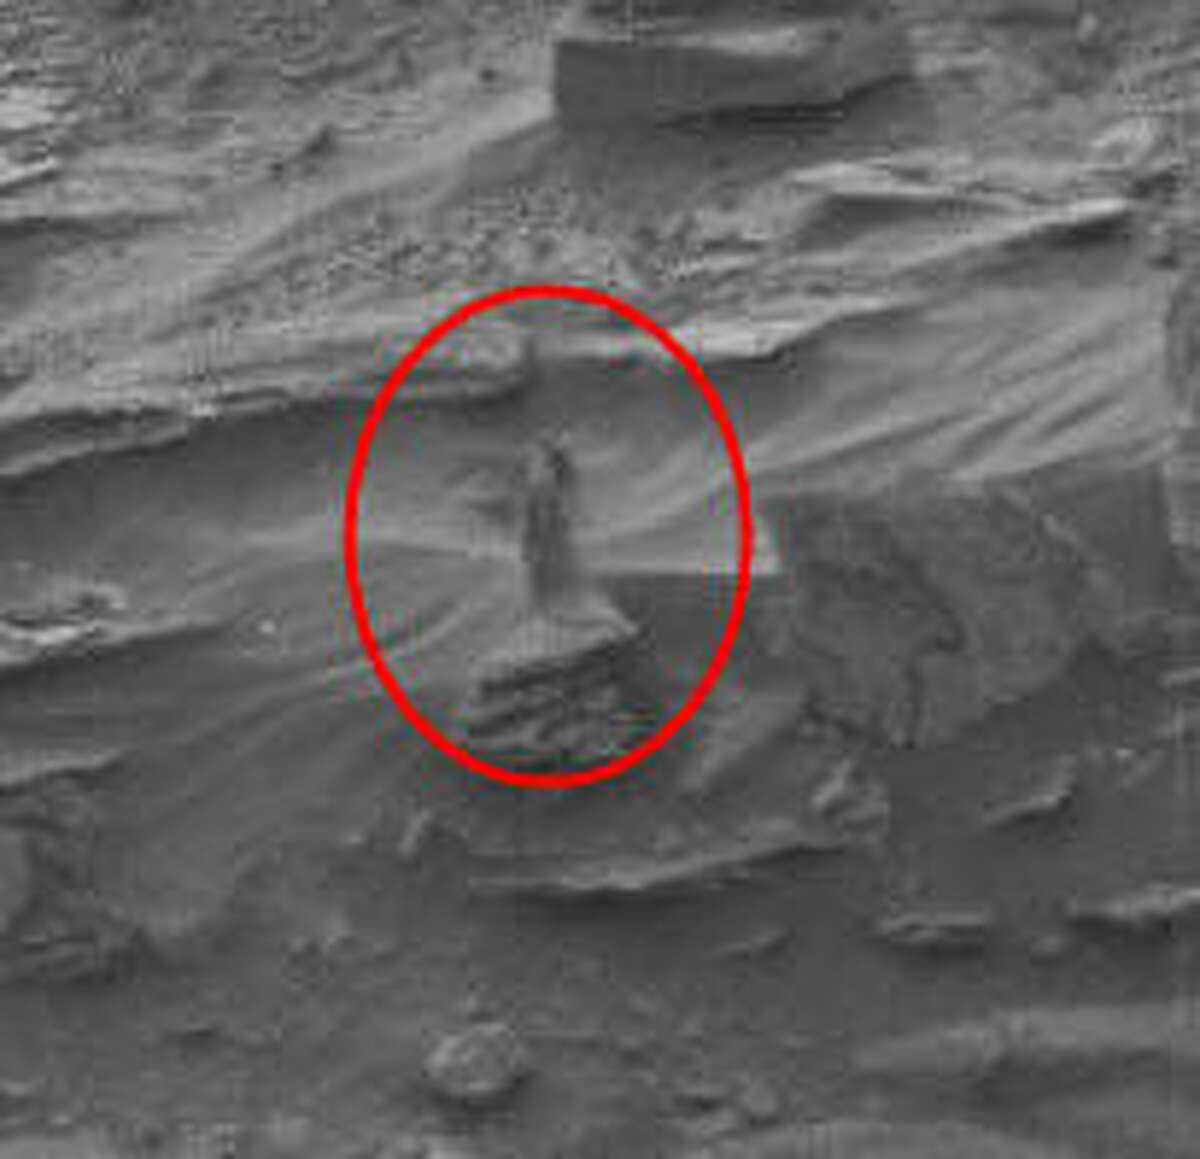 Image Of Ghostly Woman Walking On Mars Seen In Latest NASA Photo